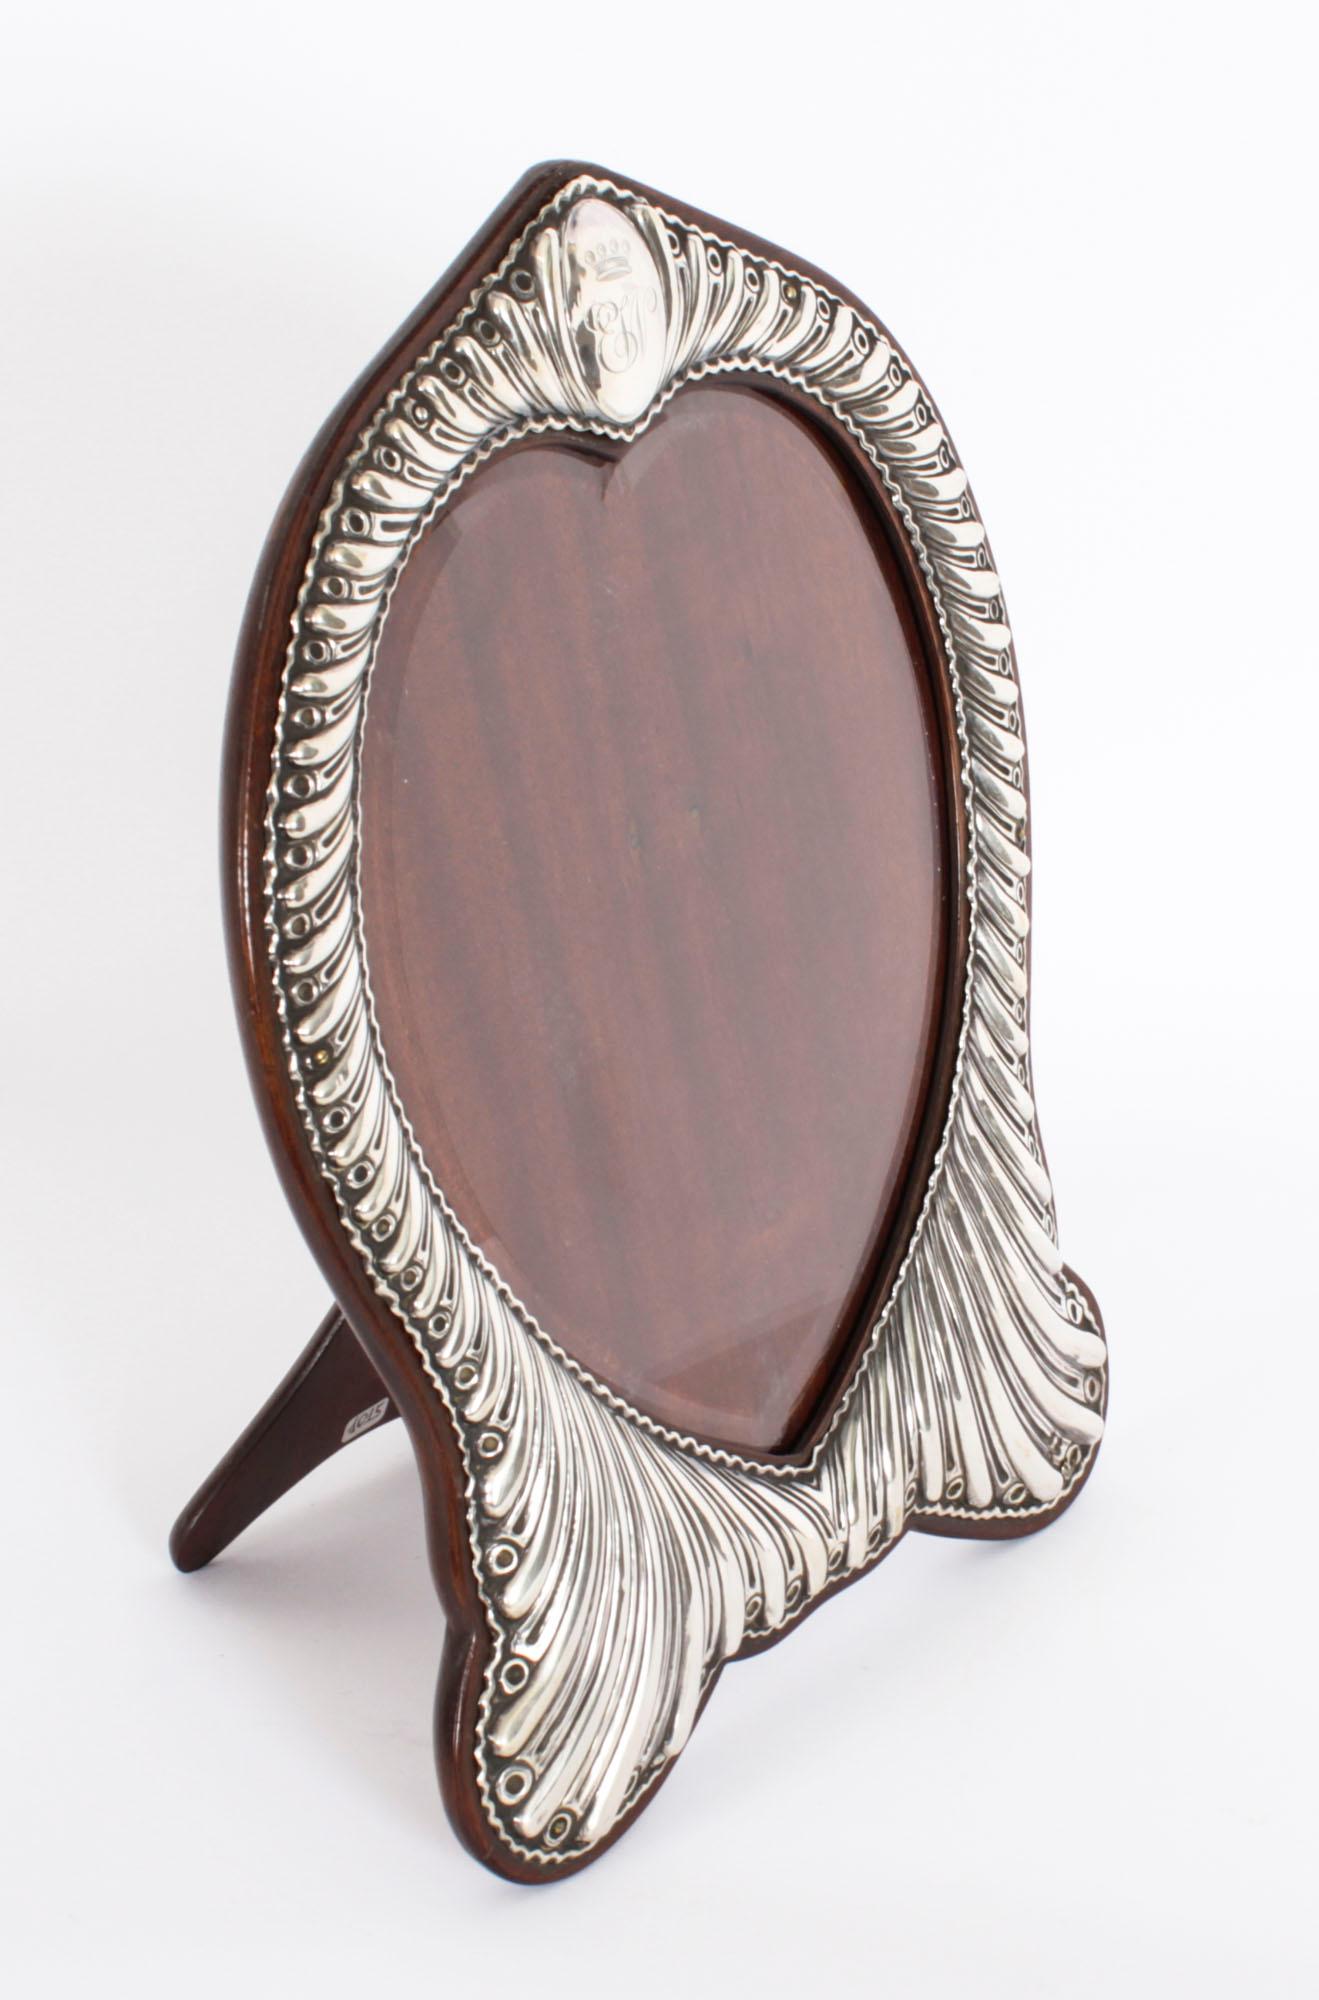 A superb Victorian sterling silver photograph frame by William Comyns, wuth hallmarks for  London 1894.

A beautiful portrait  frame decorated with a decorative heart shaped aperture and a fluted border, with a cartouche and a polished  oak easel